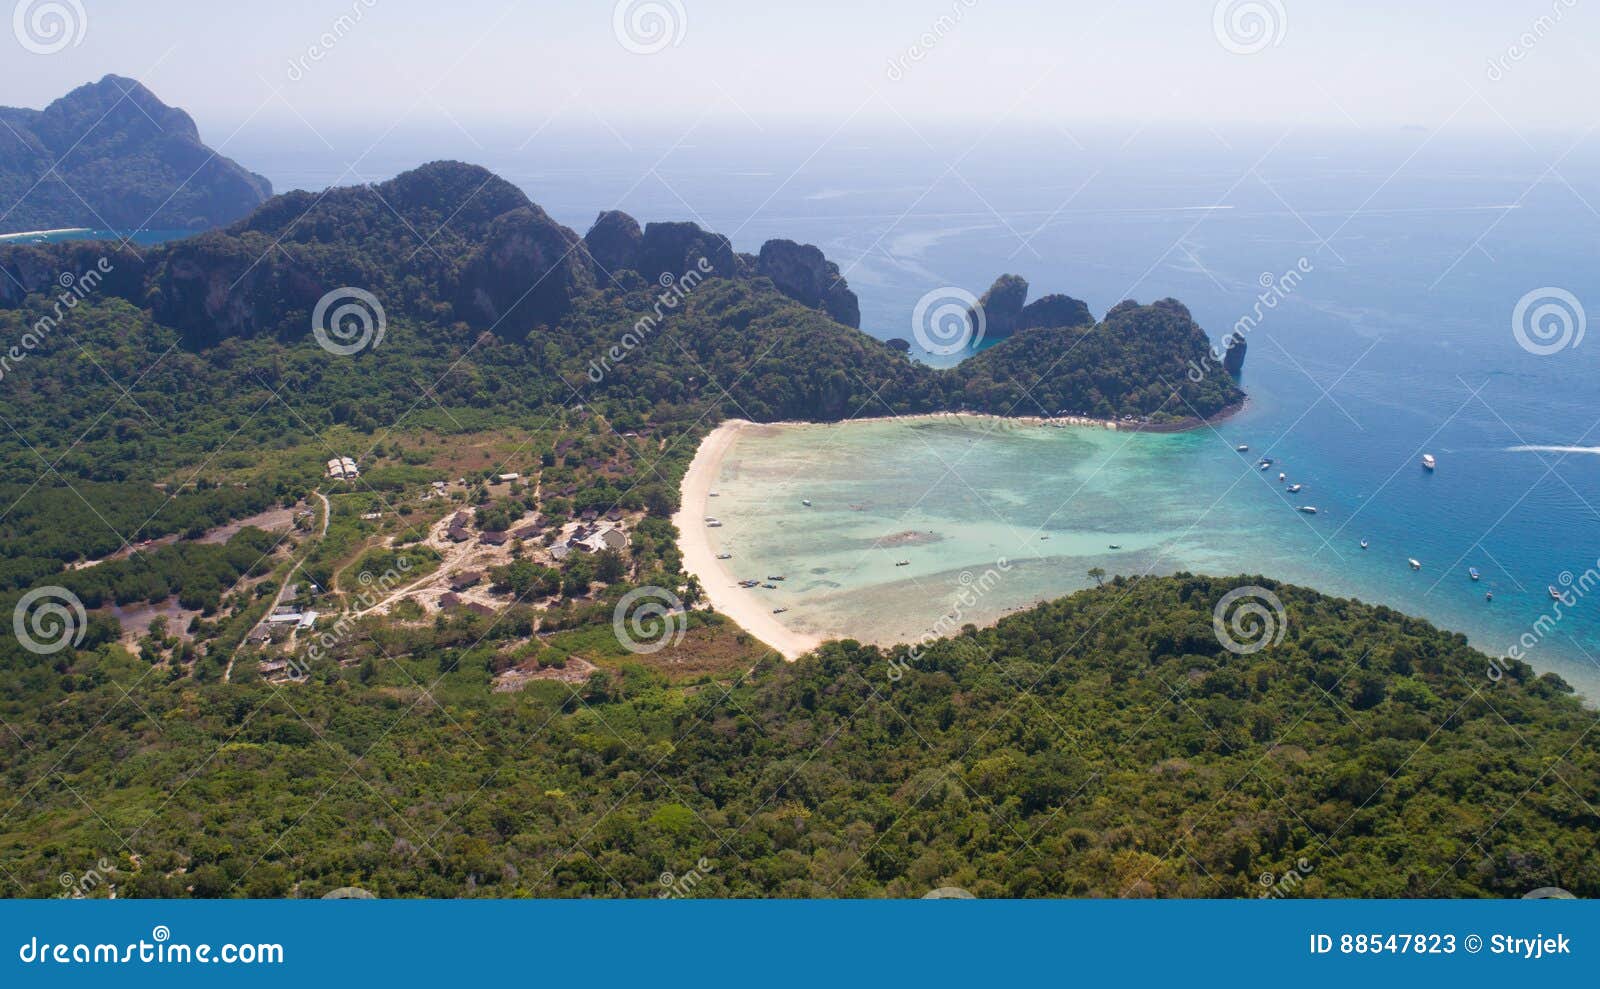 aerial drone photo of loh lana bay beach, part of iconic tropical phi phi island